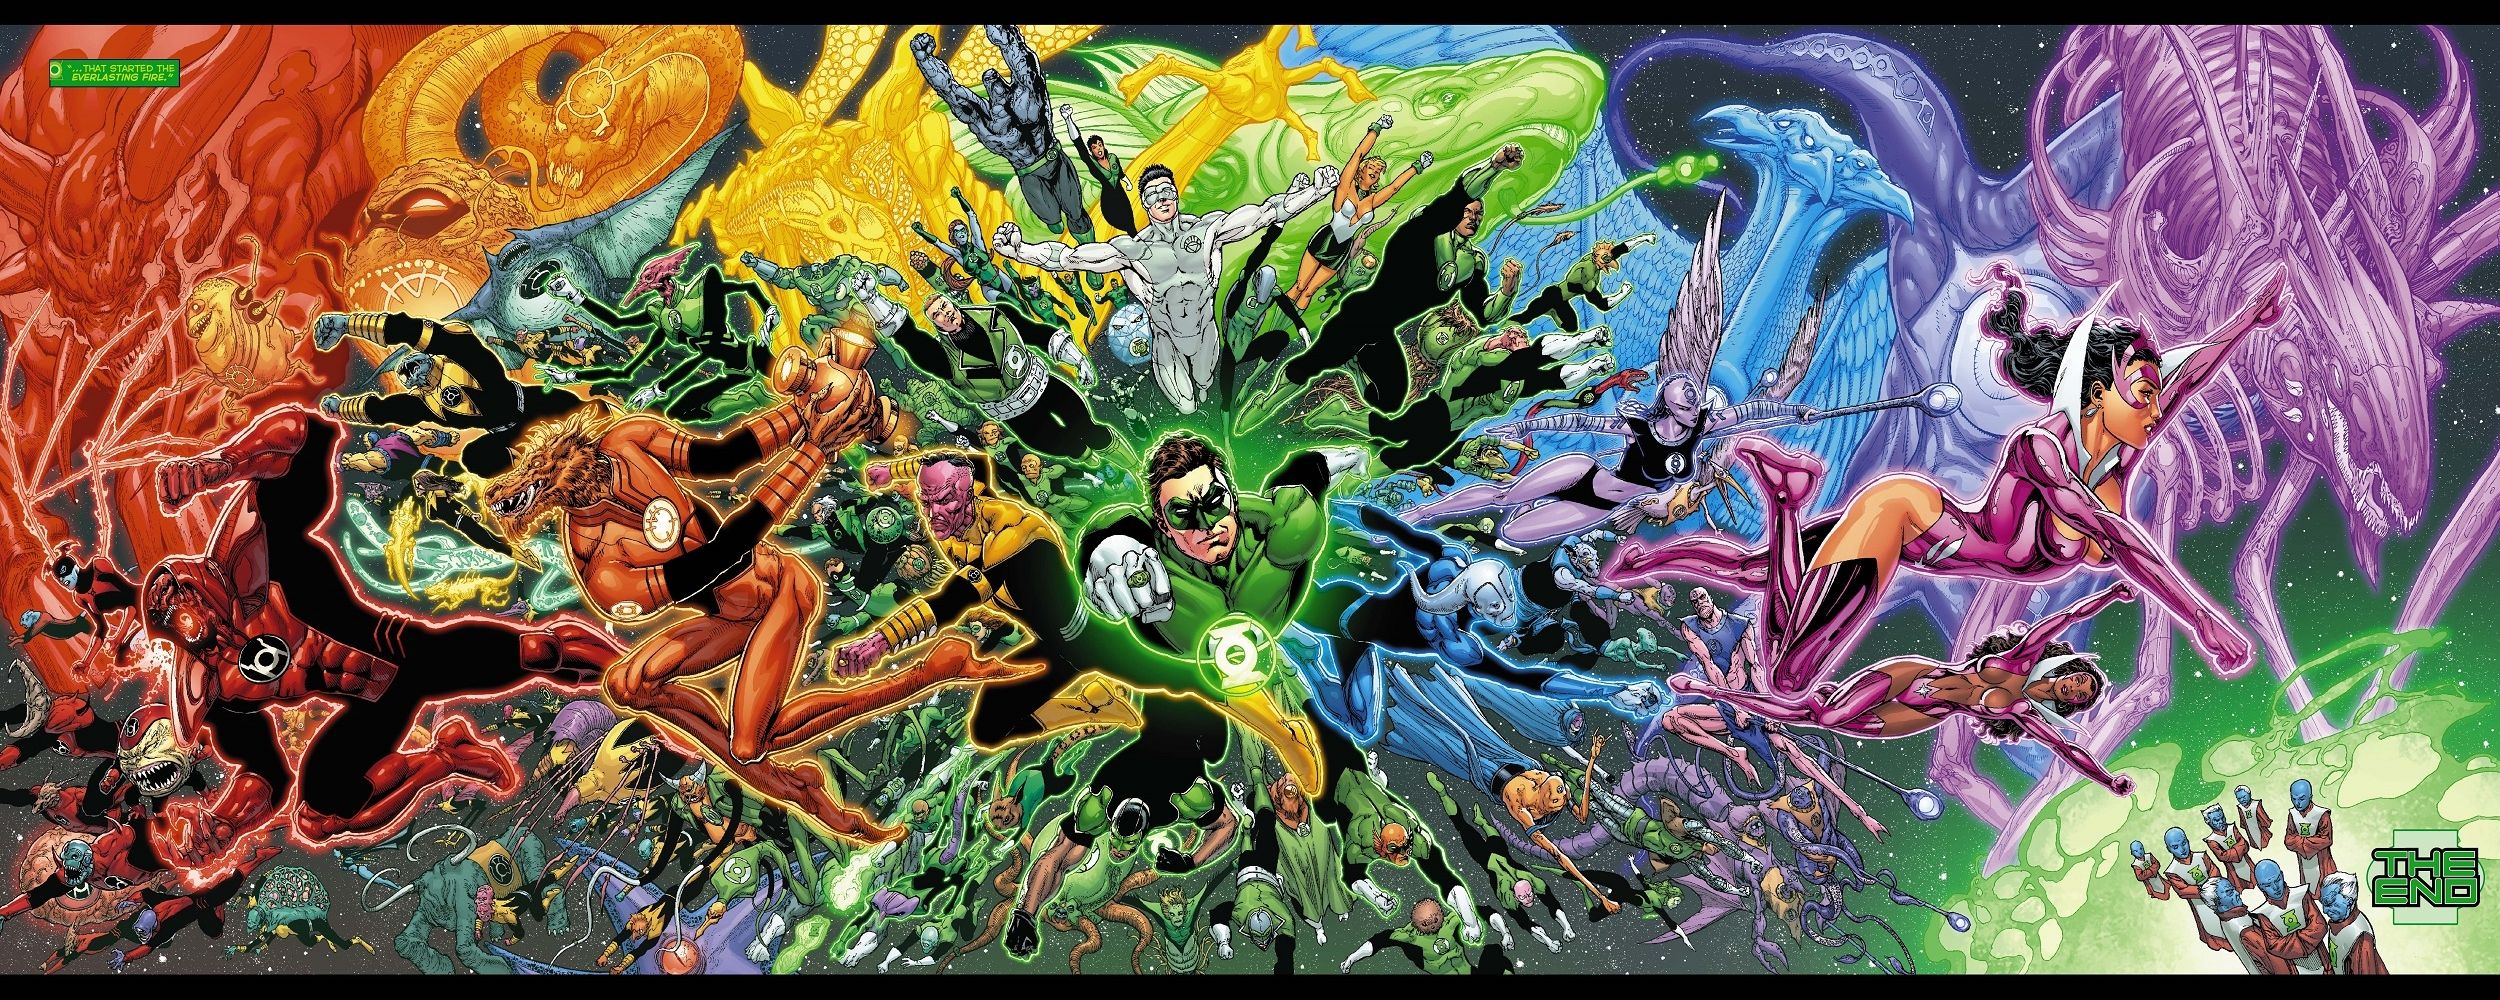 Rumored Details On GREEN LANTERN CORPS And A Possible TEEN TITANS ...